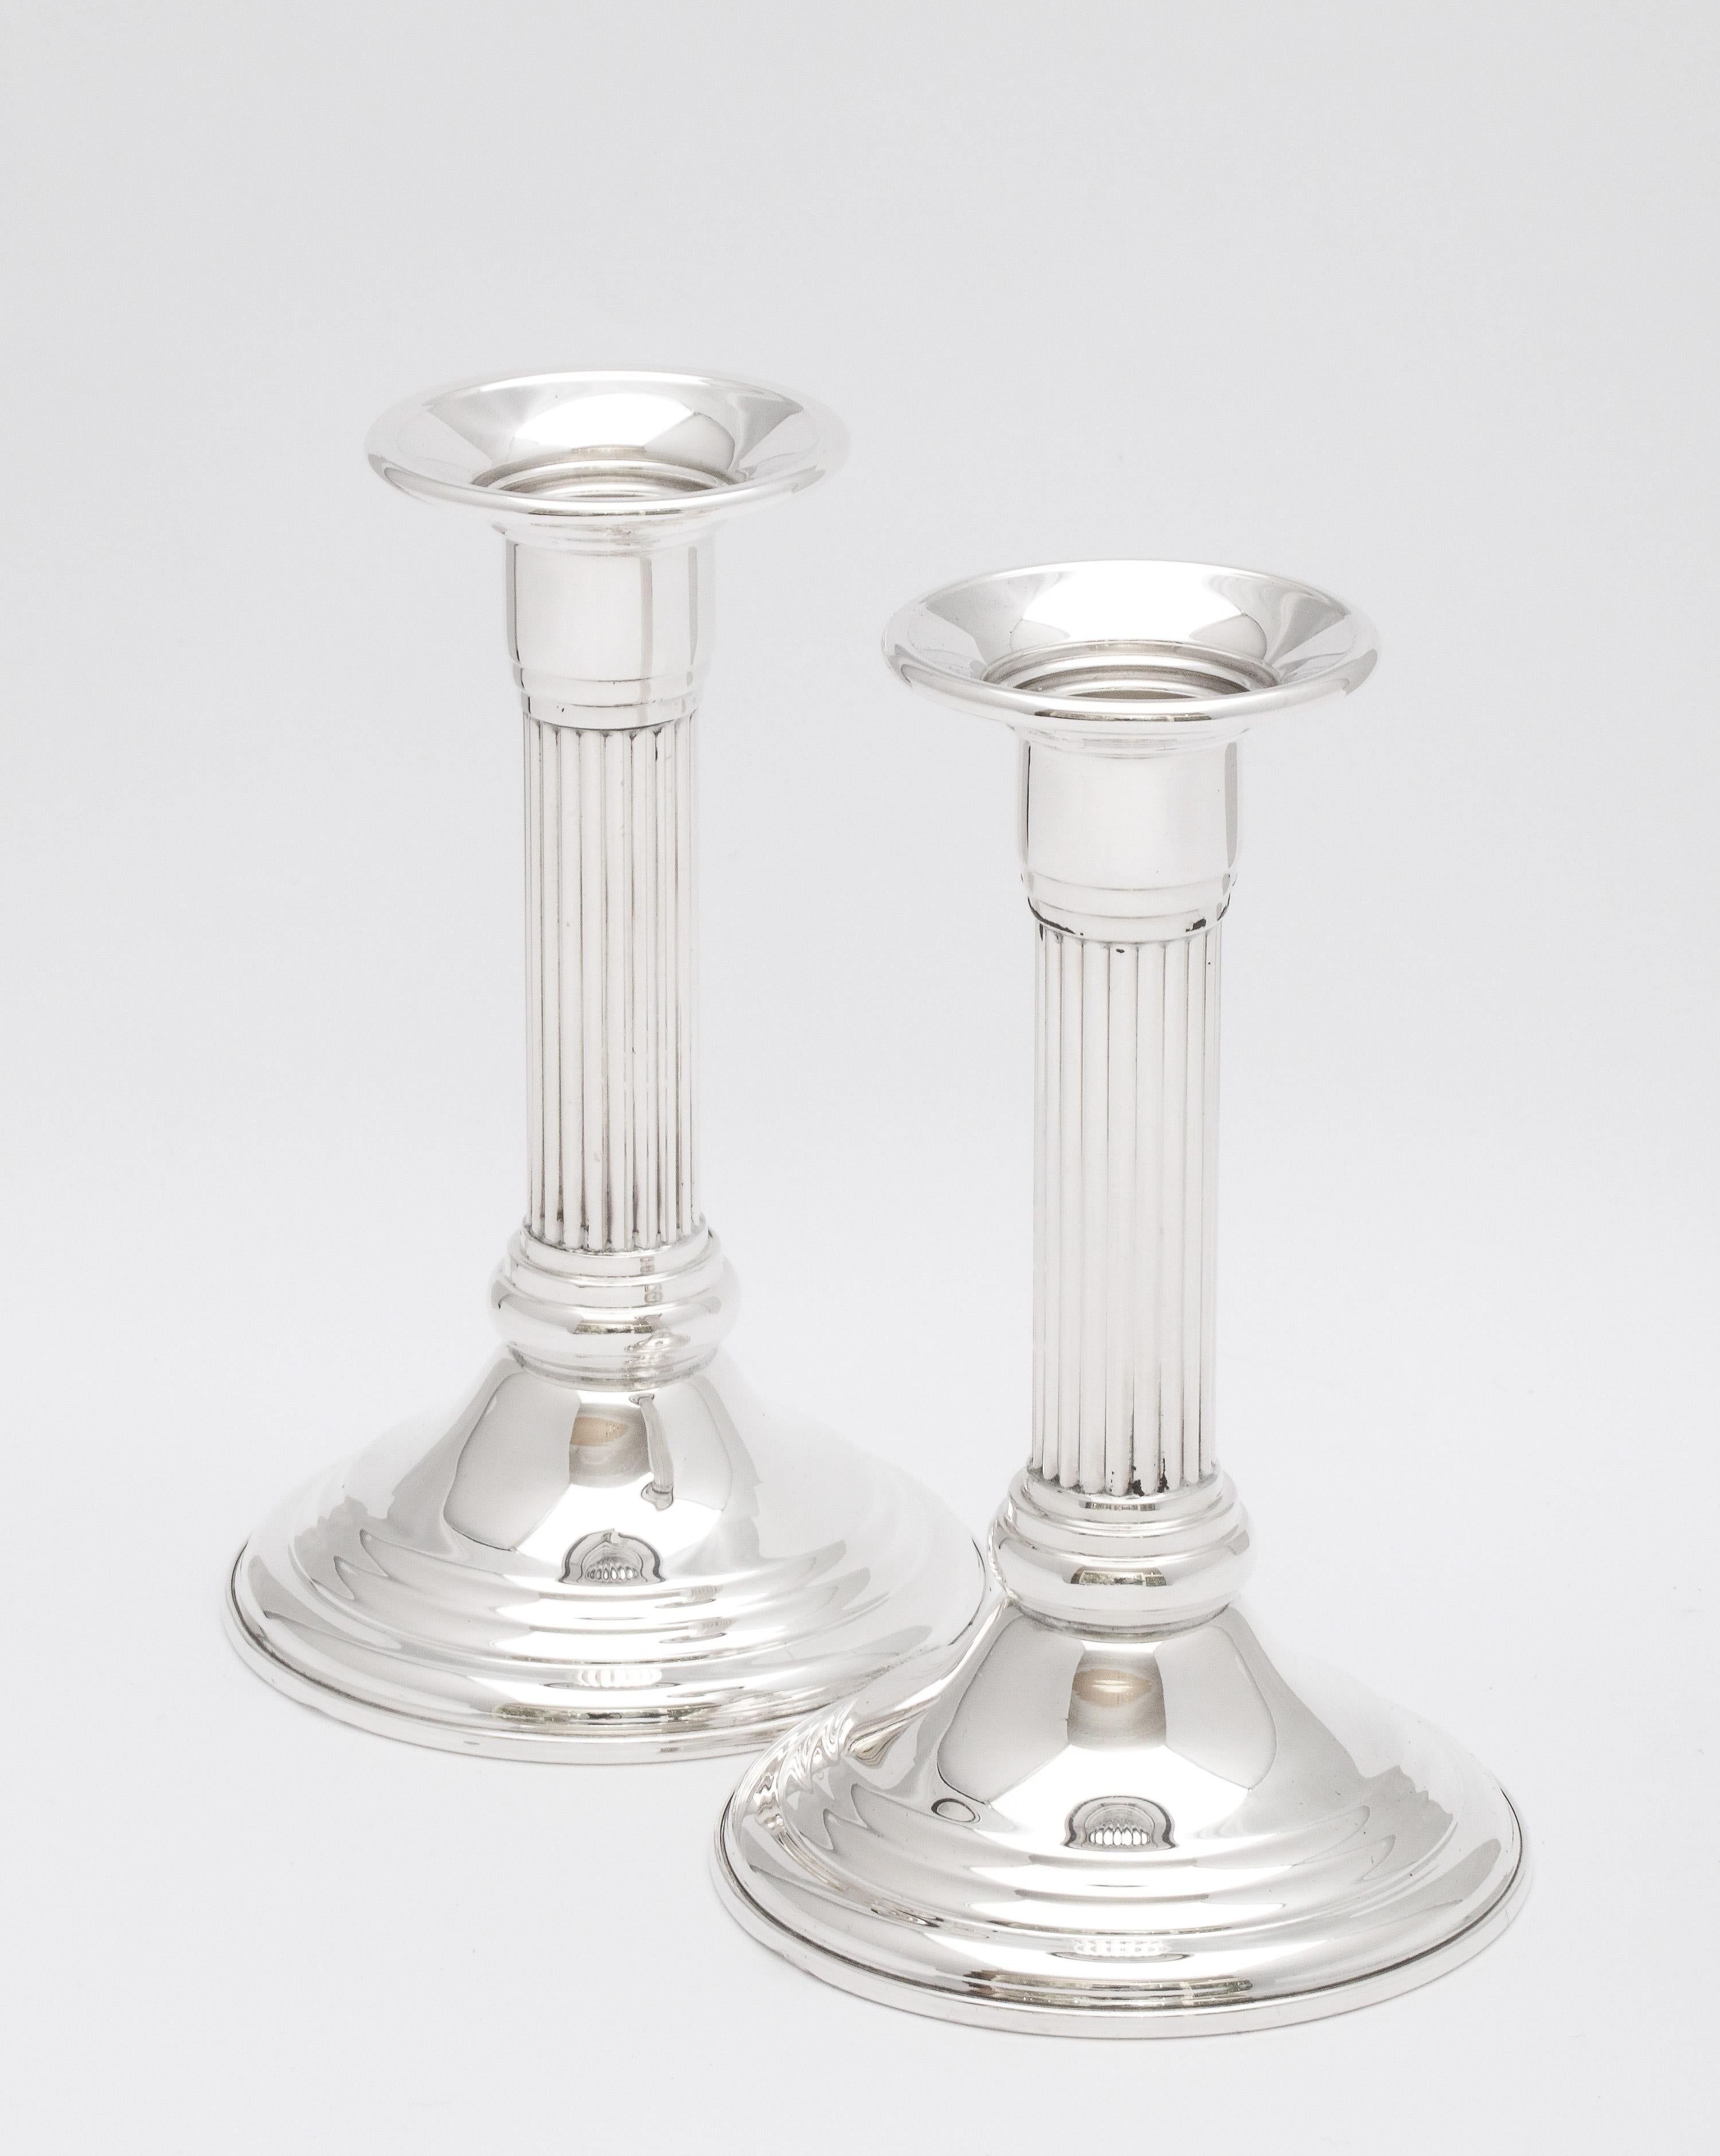 American Pair of Mid-Century Neoclassical-Style Sterling Silver Column-Form Candlesticks